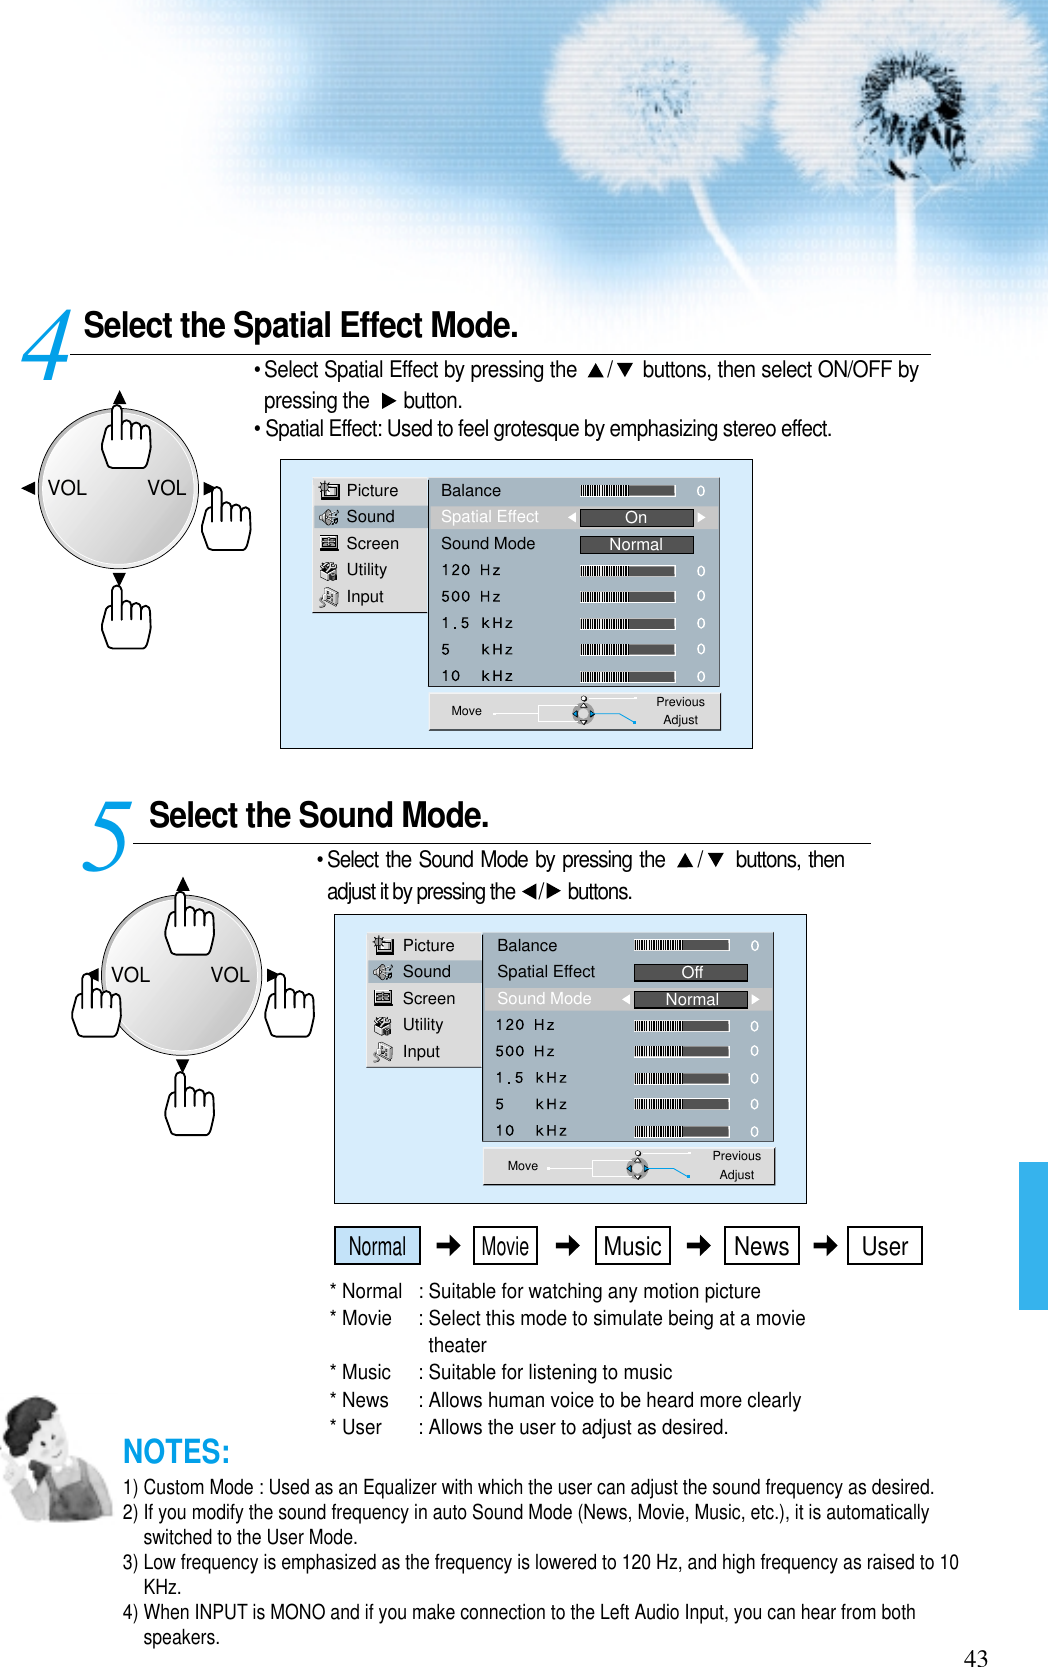 Select the Spatial Effect Mode.• Select Spatial Effect by pressing the  / buttons, then select ON/OFF bypressing the   button.• Spatial Effect: Used to feel grotesque by emphasizing stereo effect.Select the Sound Mode. 45PictureSoundScreenUtilityInputBalanceSpatial EffectSound ModeOnNormalMove PreviousAdjustPictureSoundScreenUtilityInputBalanceSpatial EffectSound ModeOffNormalMove PreviousAdjust43• Select the Sound Mode by pressing the  / buttons, thenadjust it by pressing the  / buttons. * Normal  : Suitable for watching any motion picture * Movie  : Select this mode to simulate being at a movietheater* Music  : Suitable for listening to music * News  : Allows human voice to be heard more clearly* User  : Allows the user to adjust as desired. NOTES:1) Custom Mode : Used as an Equalizer with which the user can adjust the sound frequency as desired.2) If you modify the sound frequency in auto Sound Mode (News, Movie, Music, etc.), it is automaticallyswitched to the User Mode.3) Low frequency is emphasized as the frequency is lowered to 120 Hz, and high frequency as raised to 10KHz. 4) When INPUT is MONO and if you make connection to the Left Audio Input, you can hear from bothspeakers. VOLVOLVOLVOLNormal MovieMusic UserNews